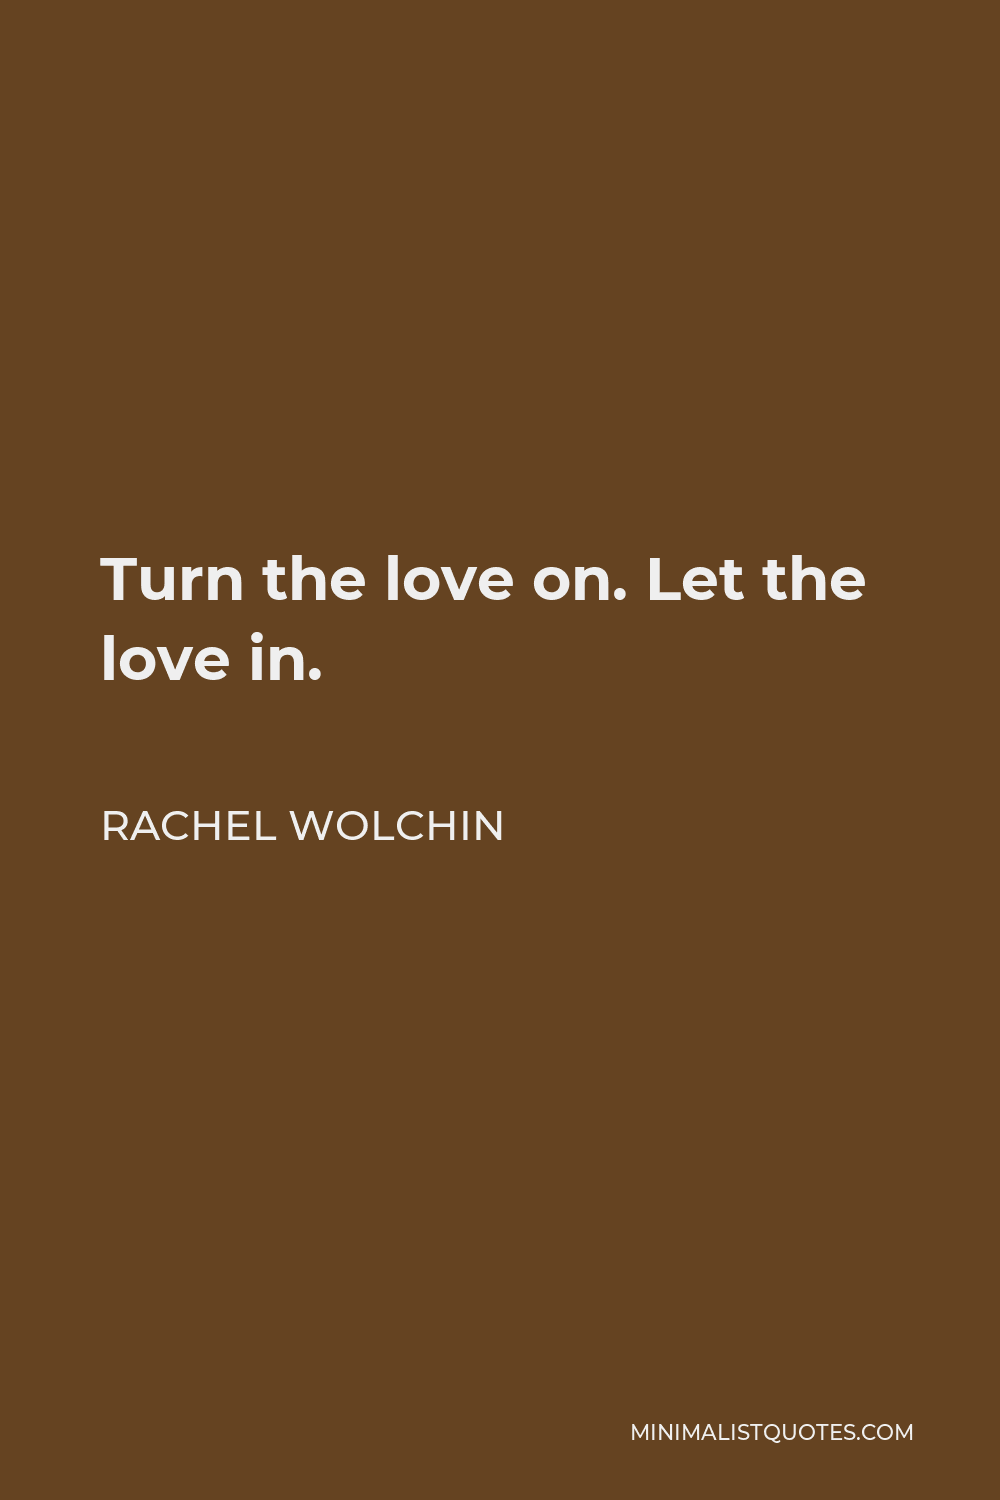 Rachel Wolchin Quote - Turn the love on. Let the love in.